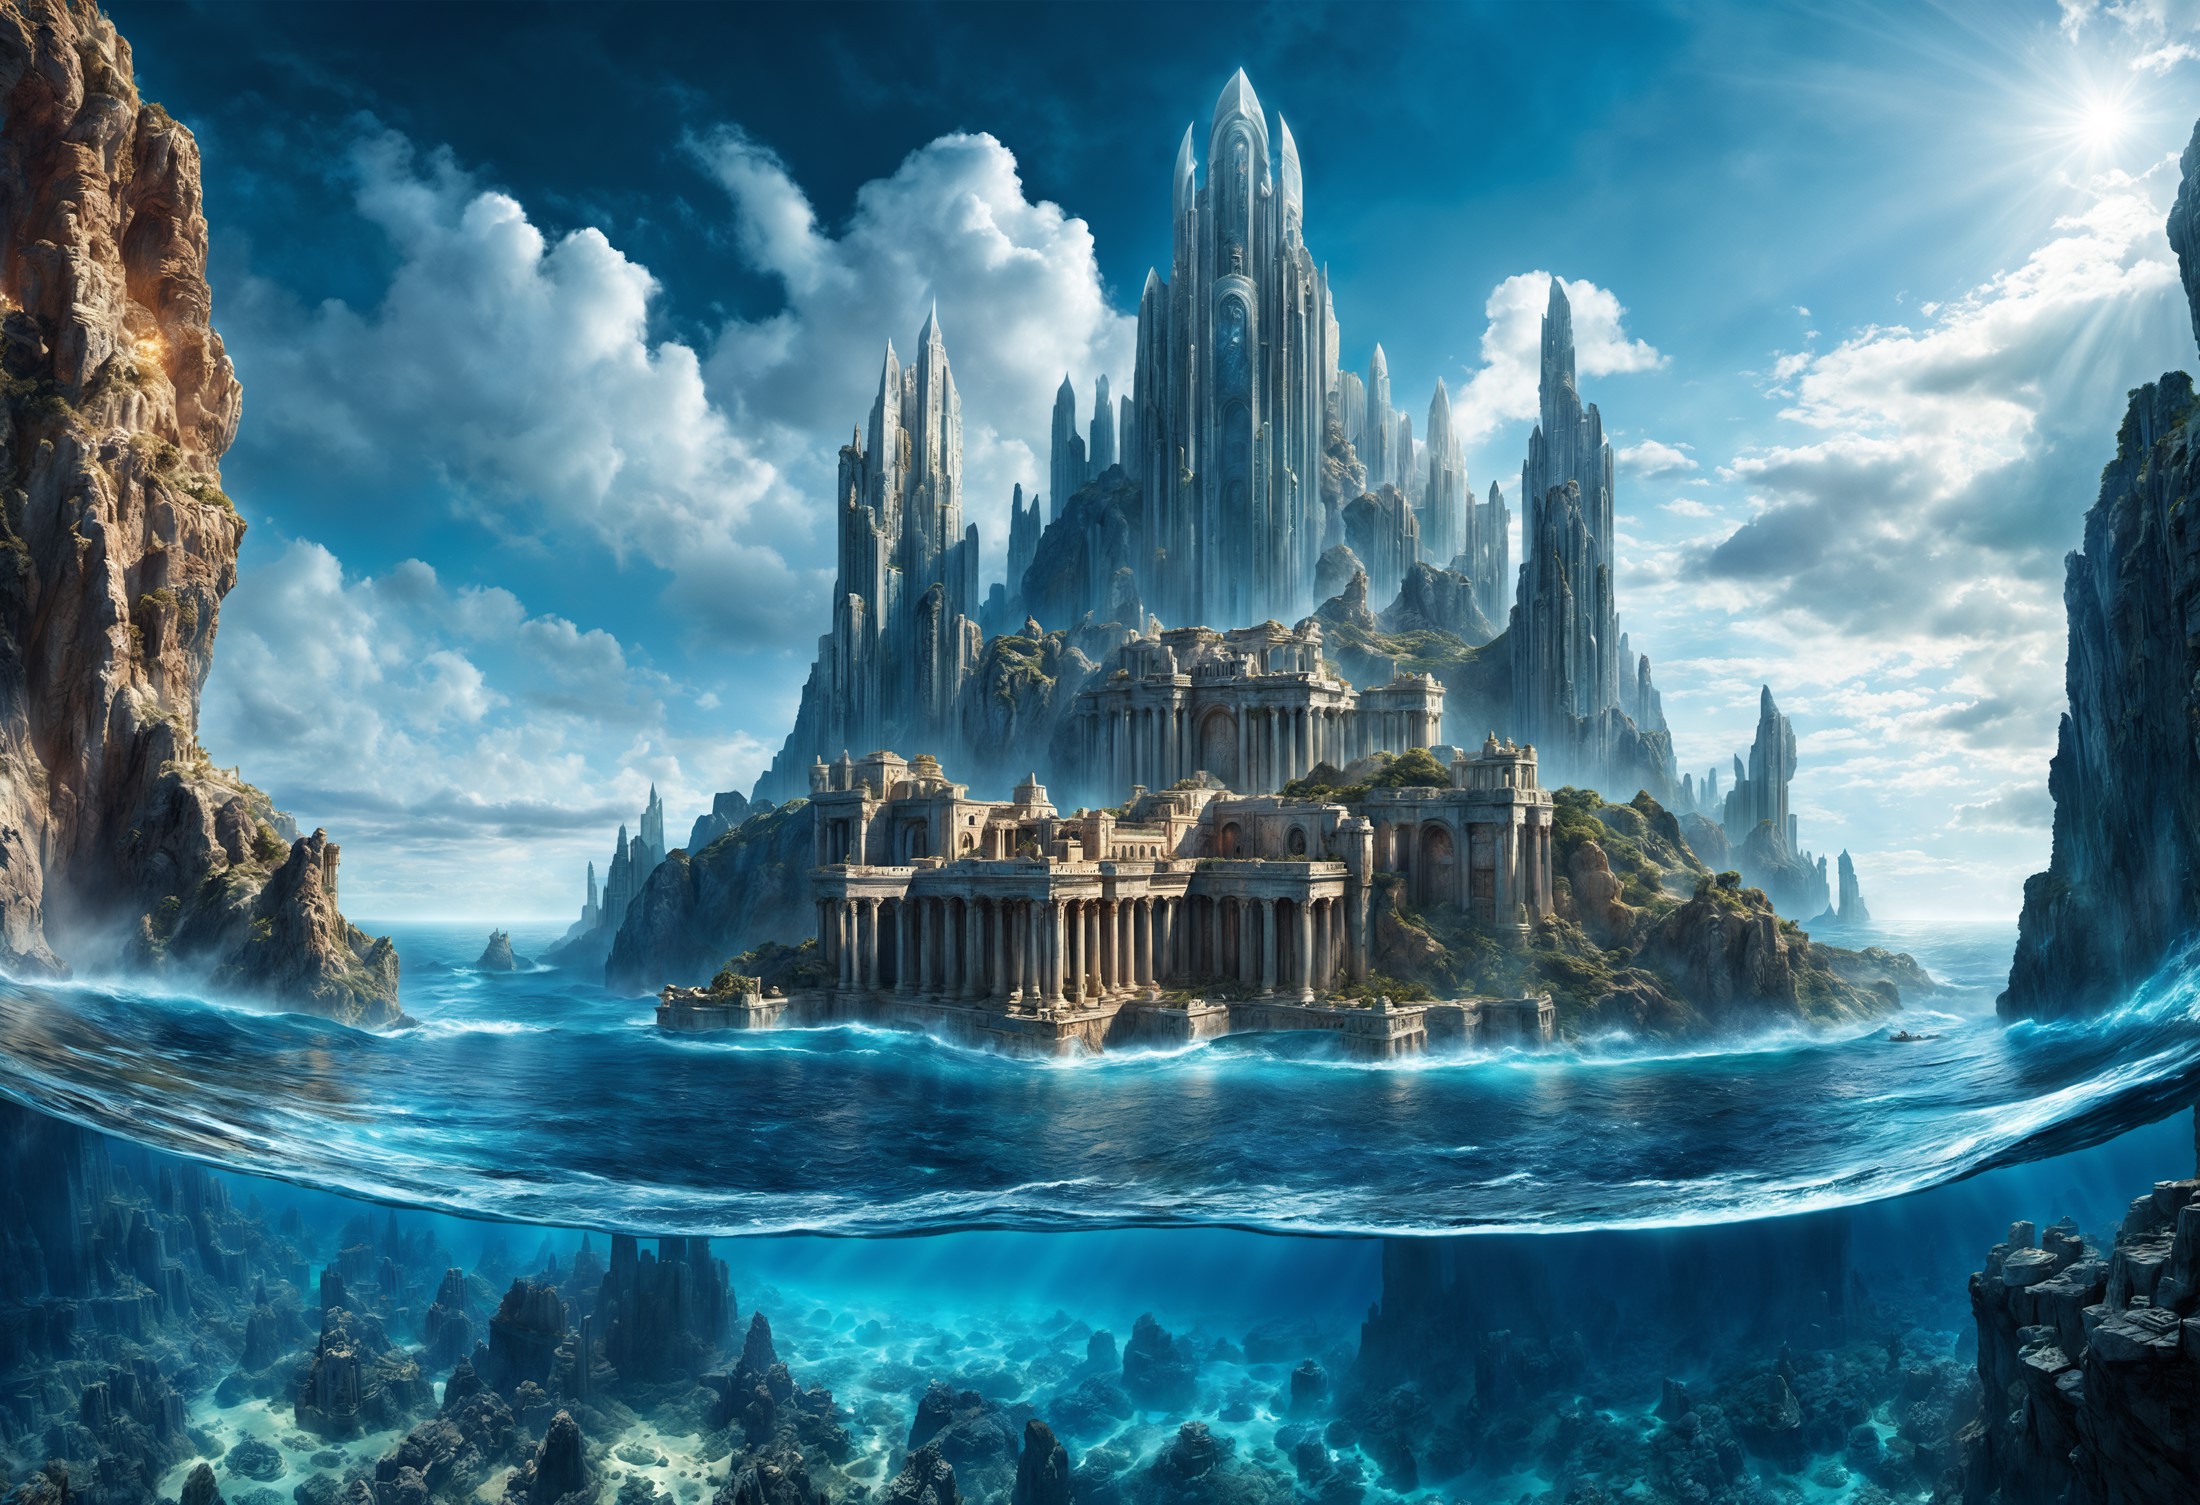 professional, high quality photorealistic  photo RAW
of (Atlantis, A lost city of great wisdom and power, now drowned bene...